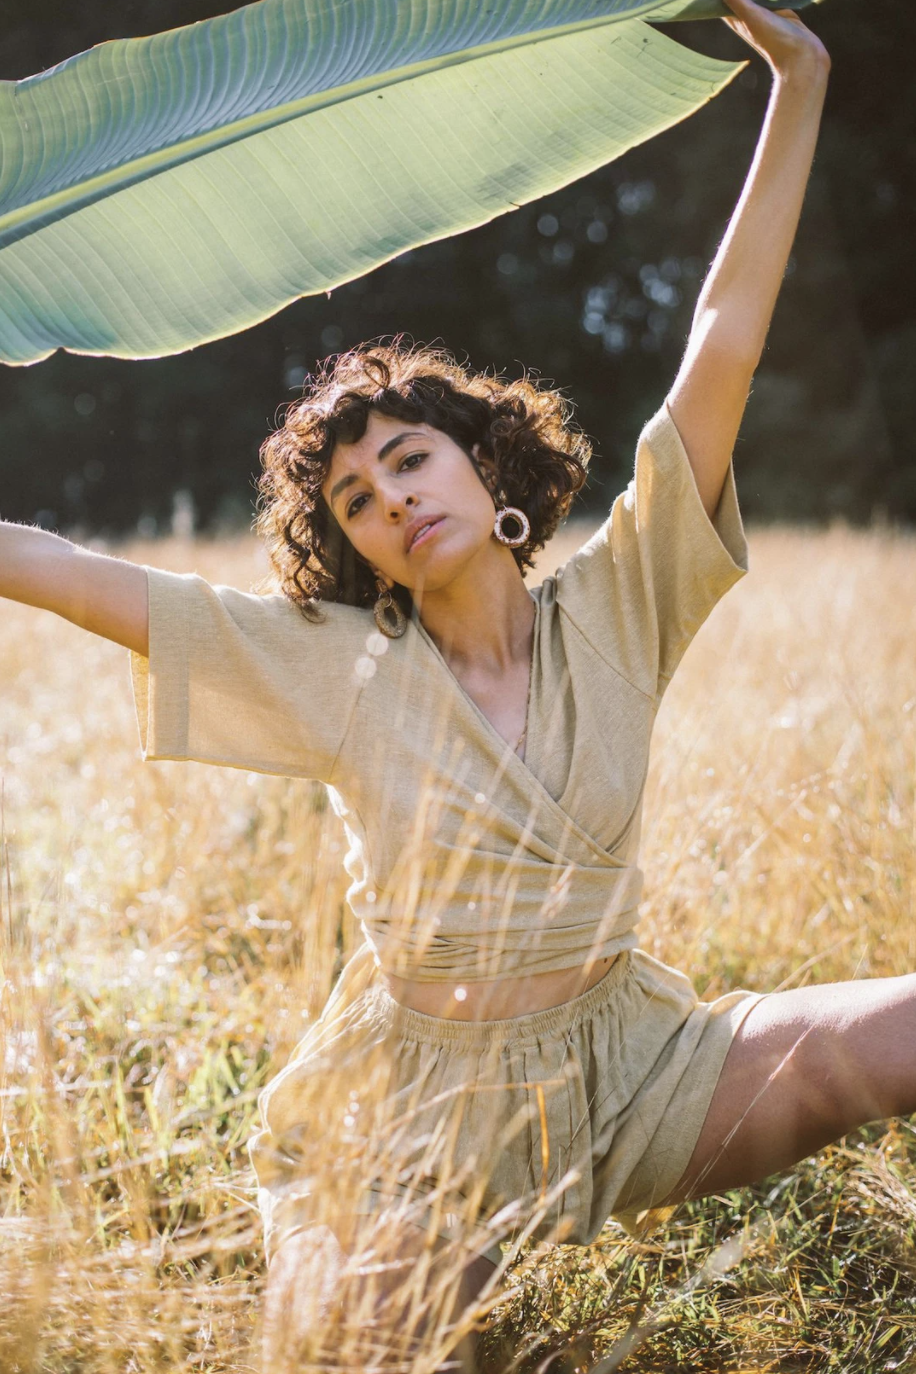 12 Plant-dyed, organic clothing brands to support and wear for